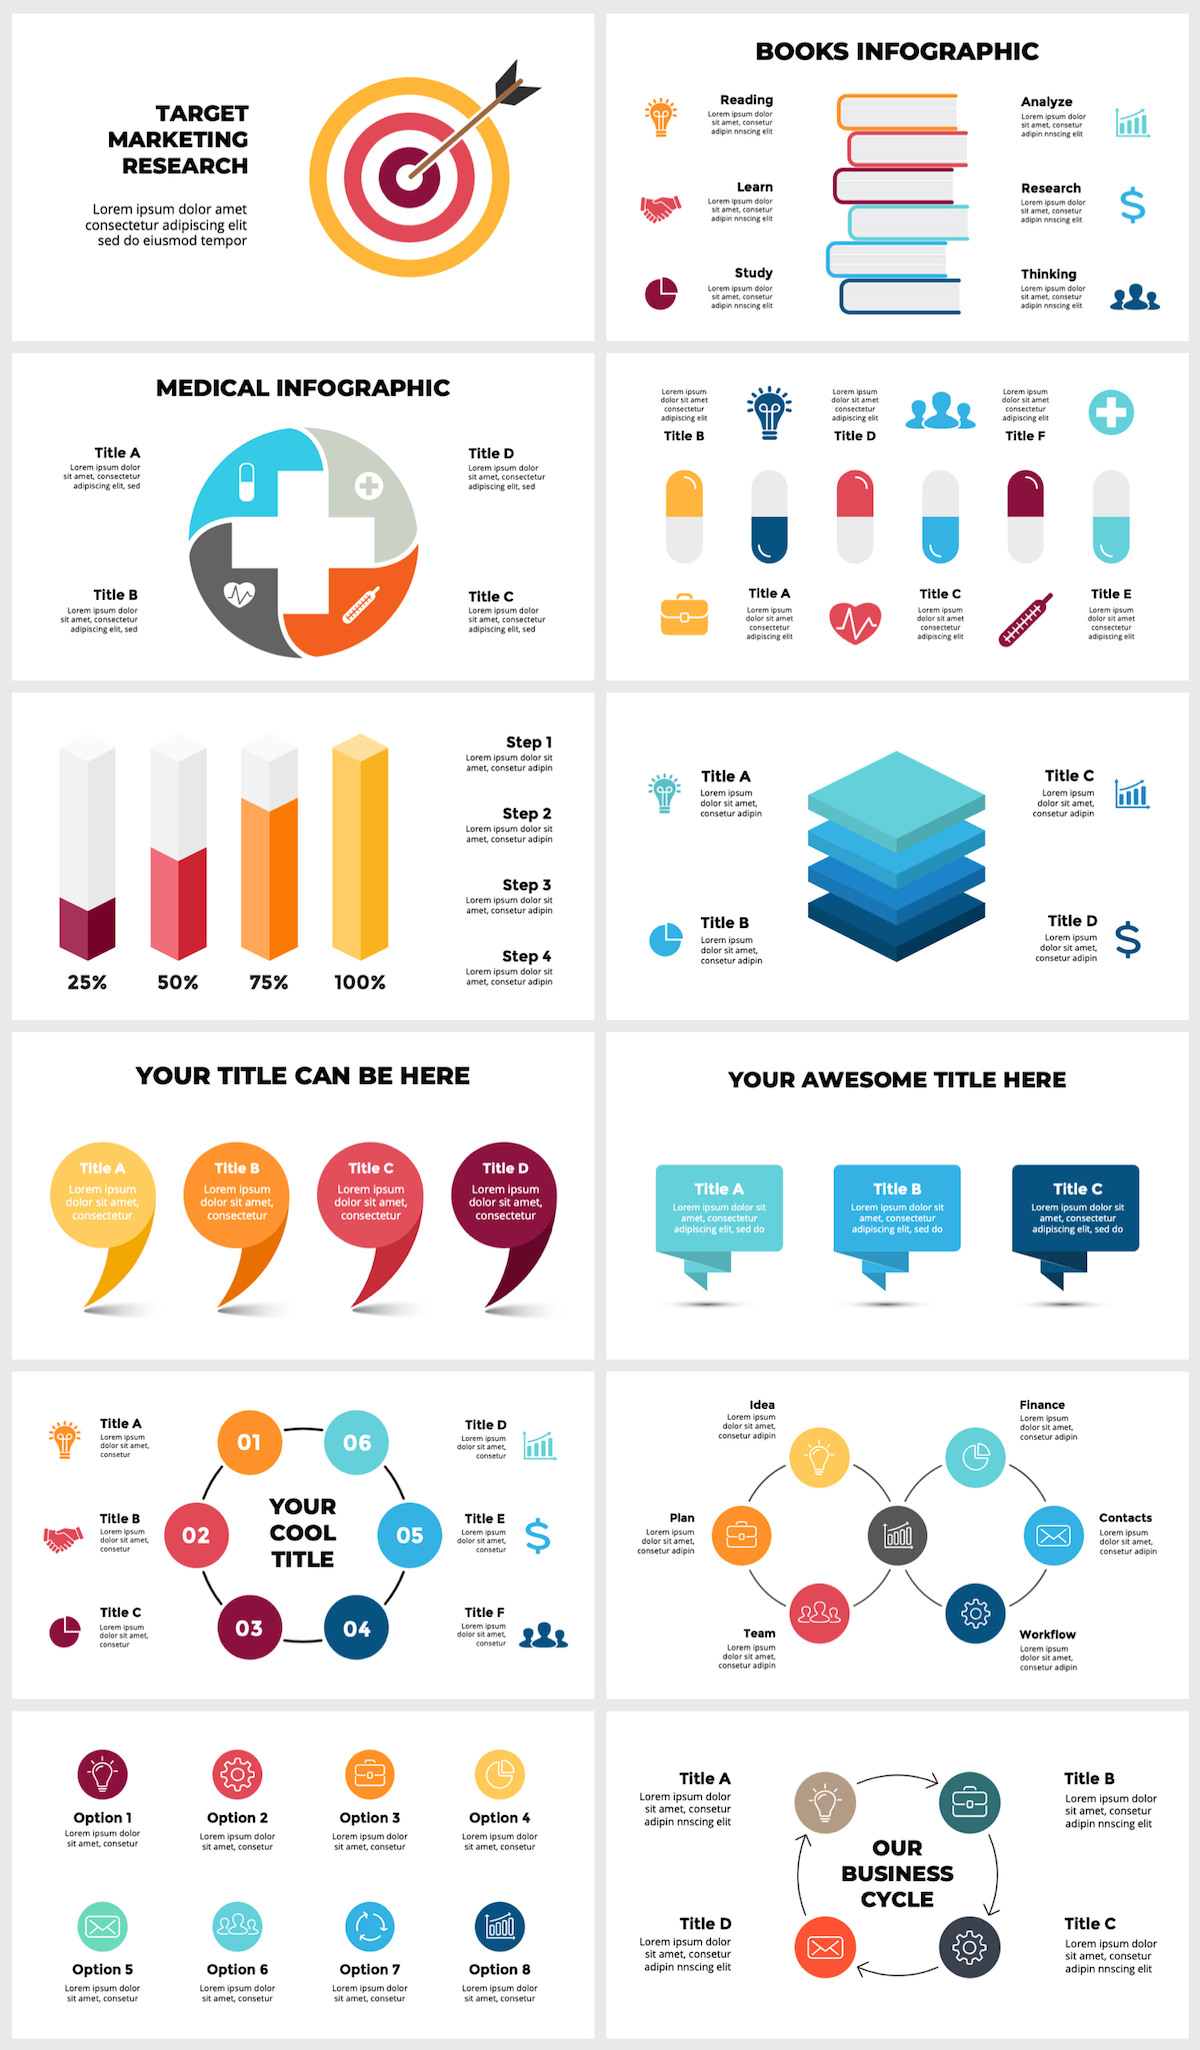 Wowly - 3500 Infographics & Presentation Templates! Updated! PowerPoint Canva Figma Sketch Ai Psd. - 133